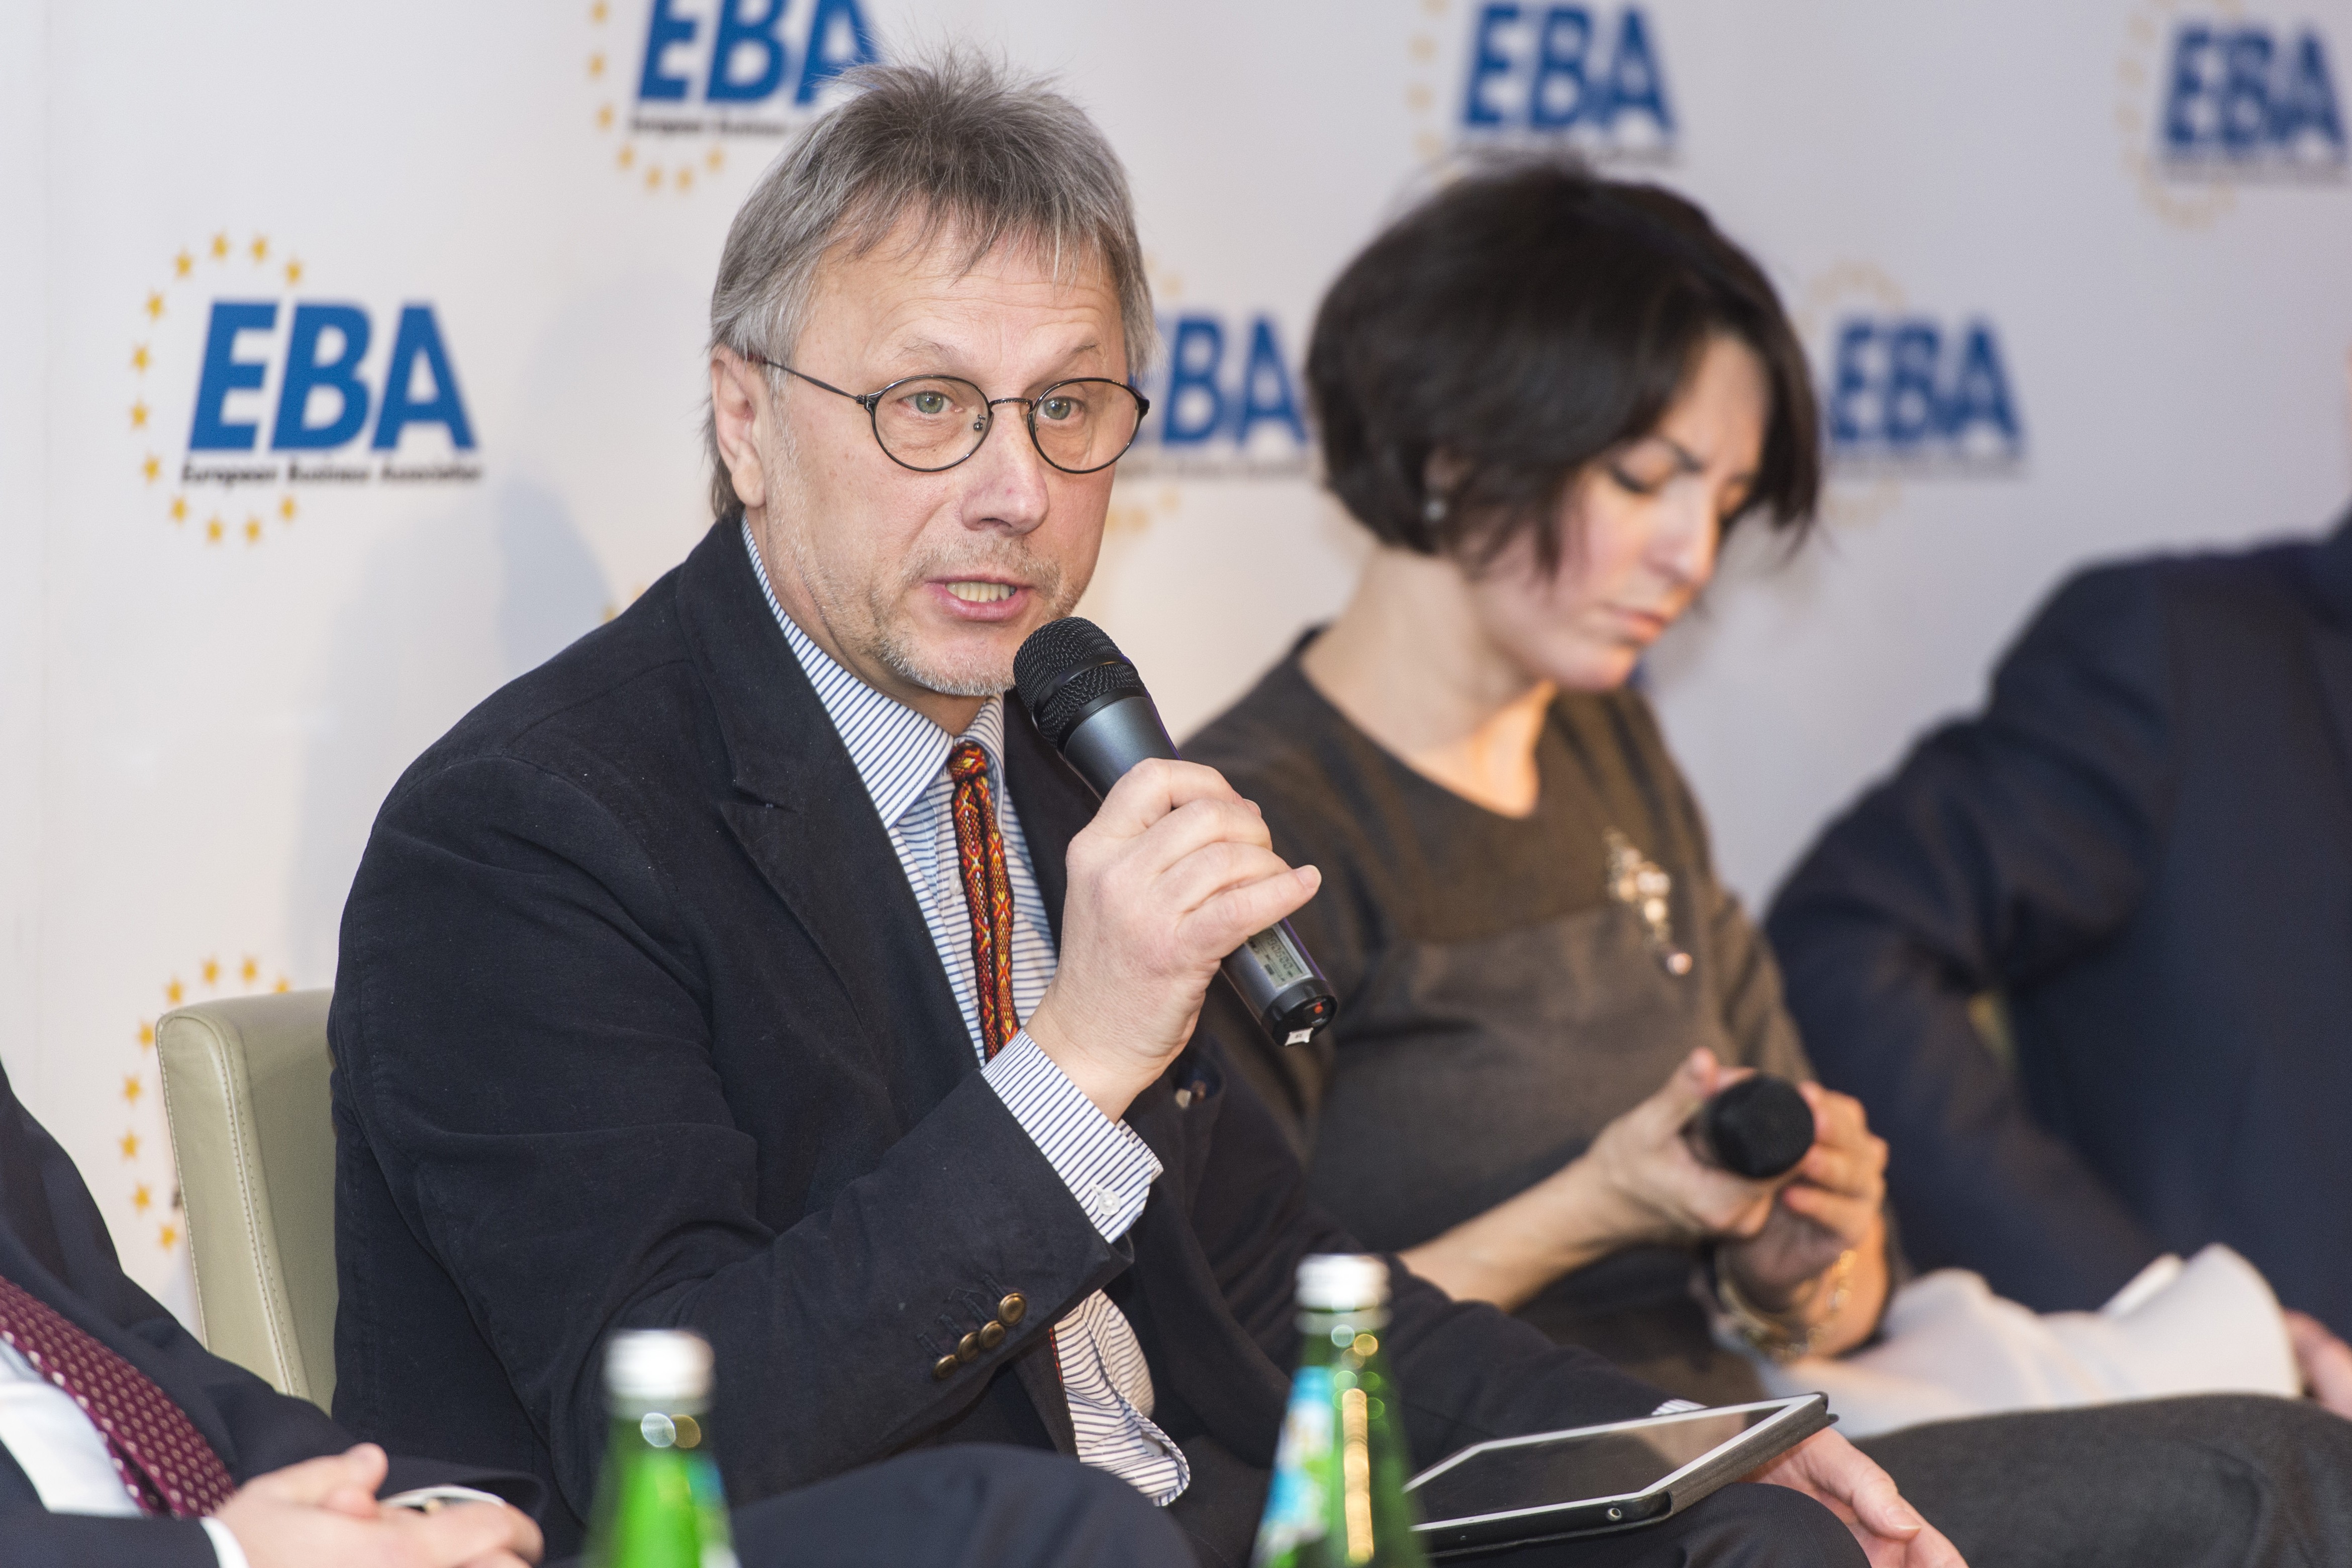 Volodymyr Lavrenchuk, the CEO at Raiffeisen Bank Aval, talks to the audience at the European Business Association’s first General Meeting of the year on Jan. 26